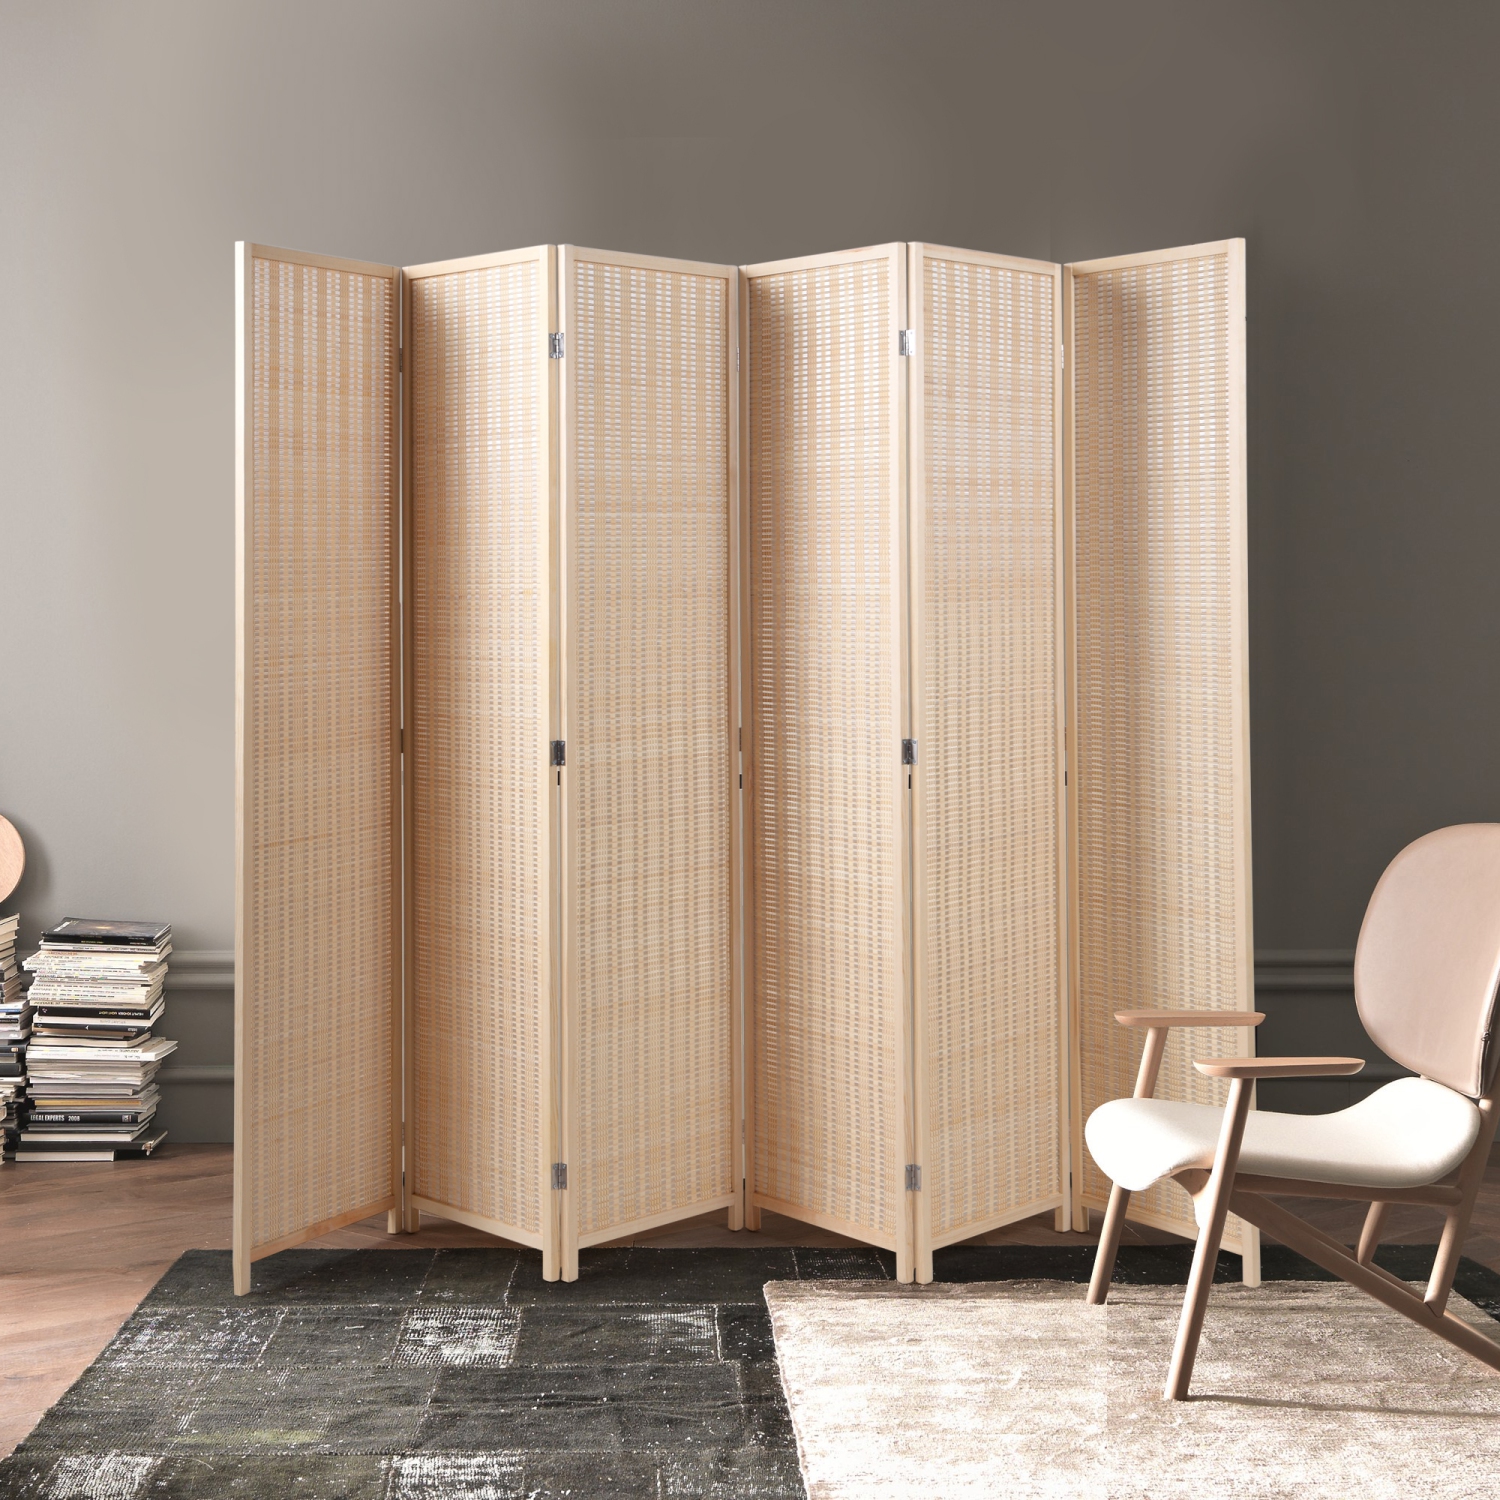 Jaxsunny 6 - Panel Room Divider Hand-Knitted Folding Screen with Rustic Taste and Natural Flavor